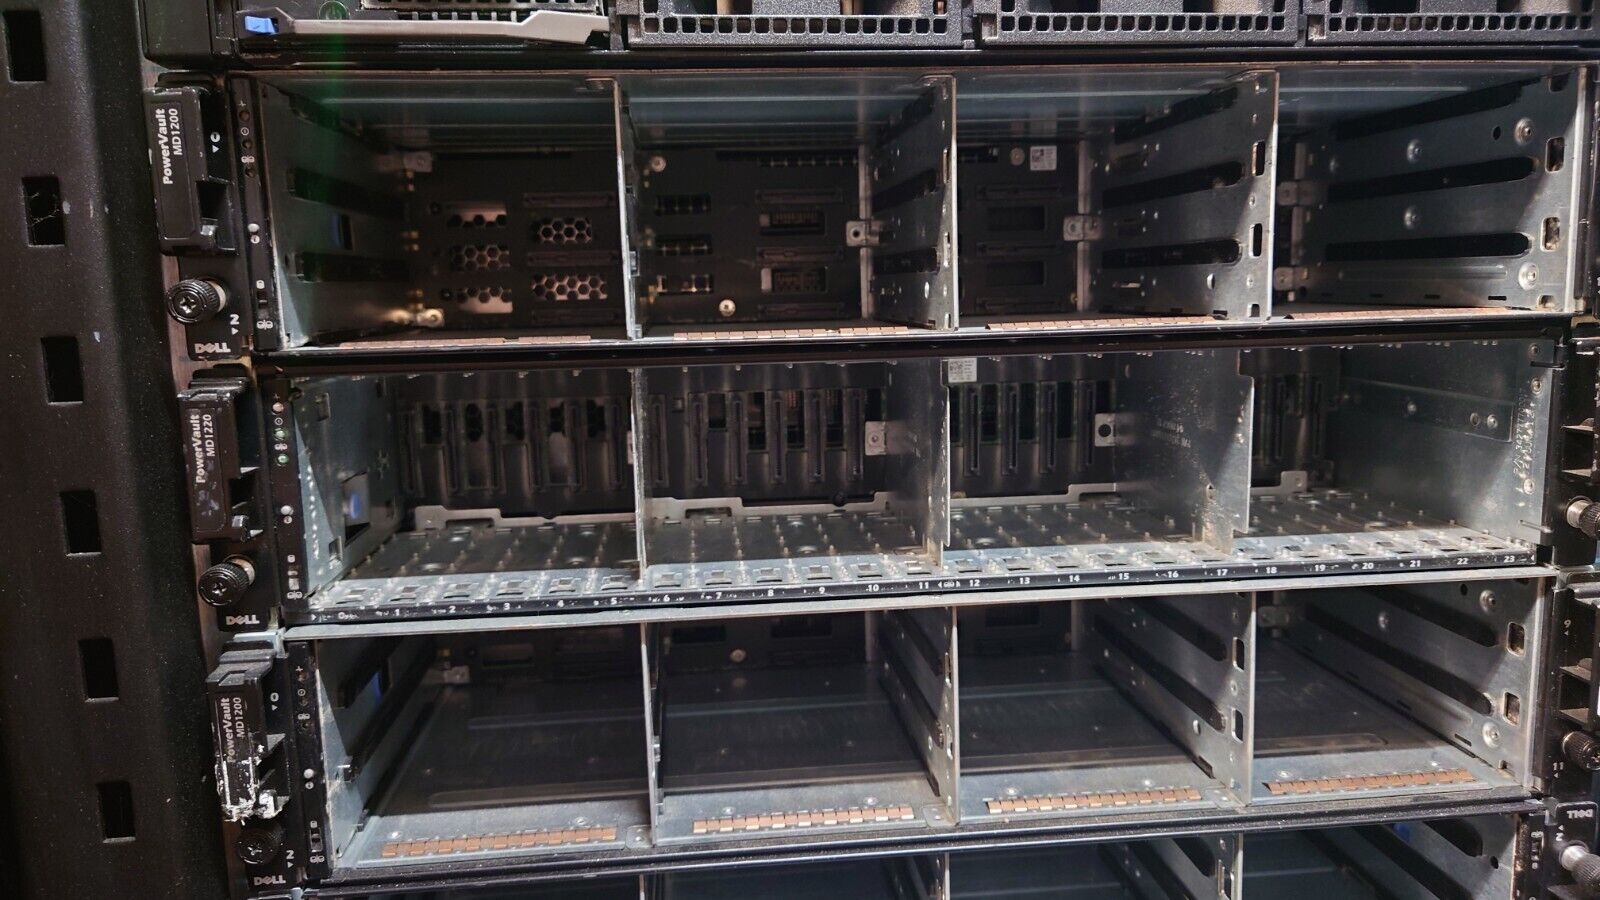 Dell PowerVault MD1200 Direct Attached Storage DAS 2x 03DJRJ Controllers 2xPSU